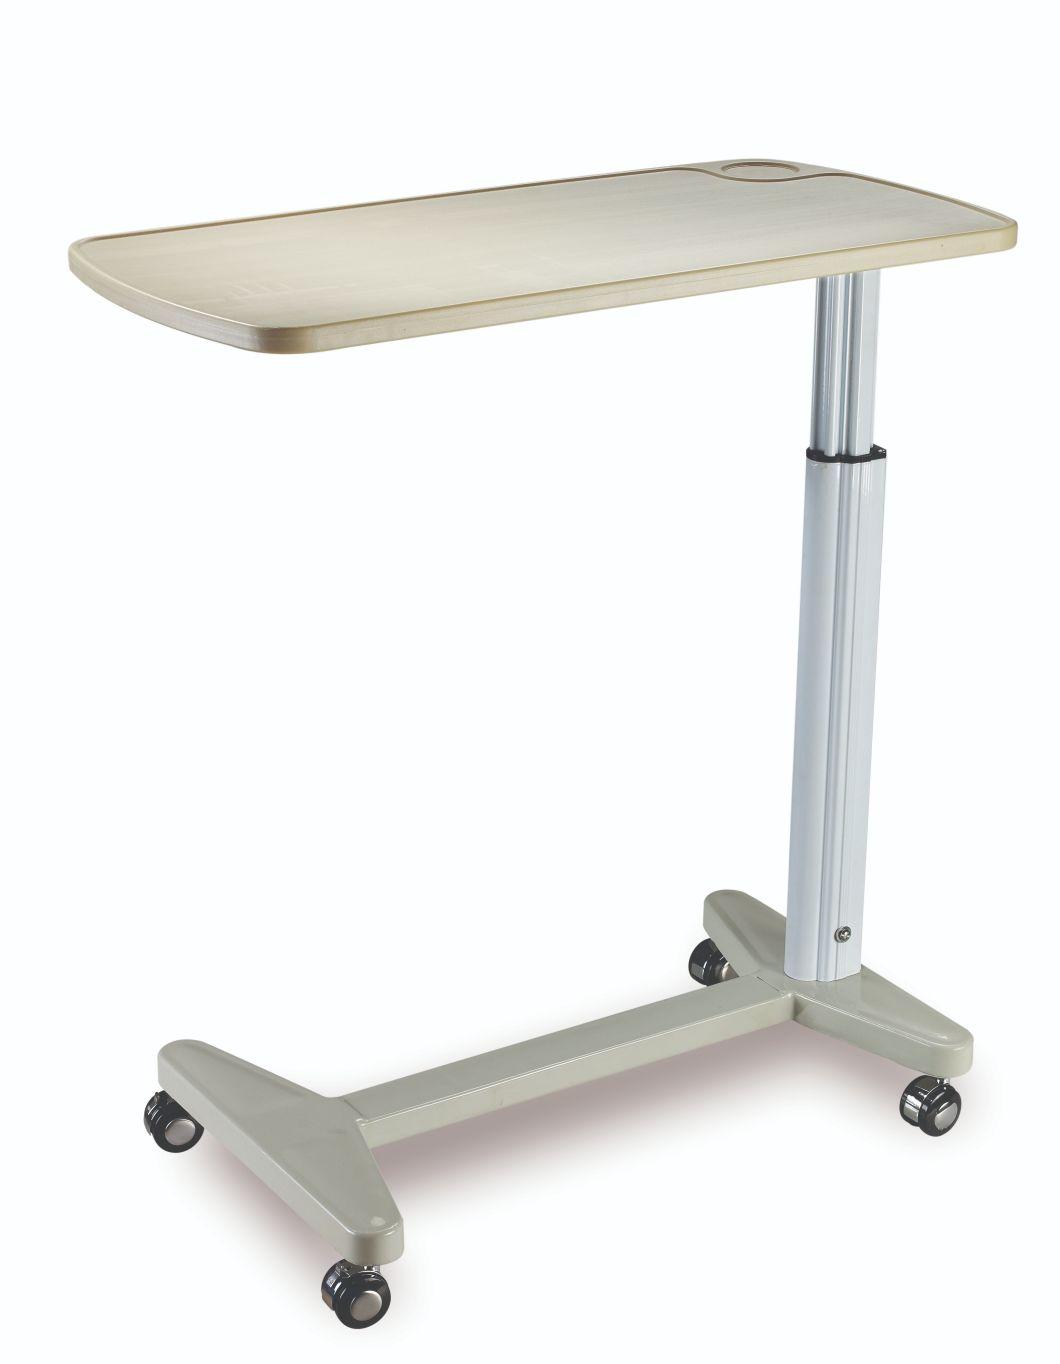 Movable ABS Top Adjustable Bedside Table for Hospital